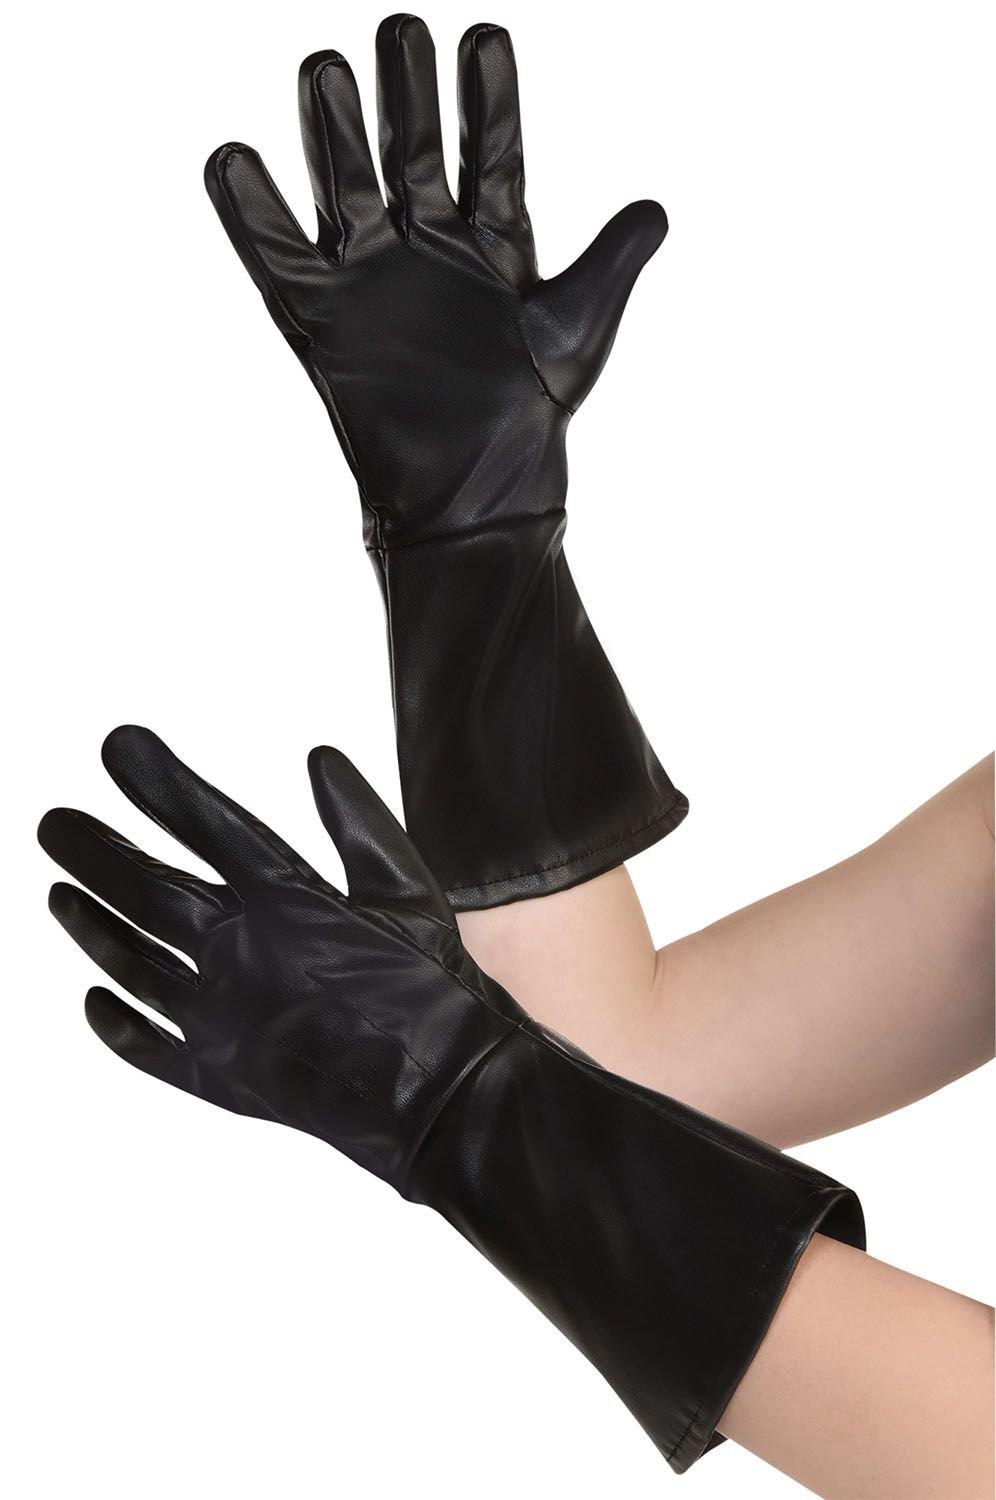 City Kids Black Long | Party Gloves Leather for